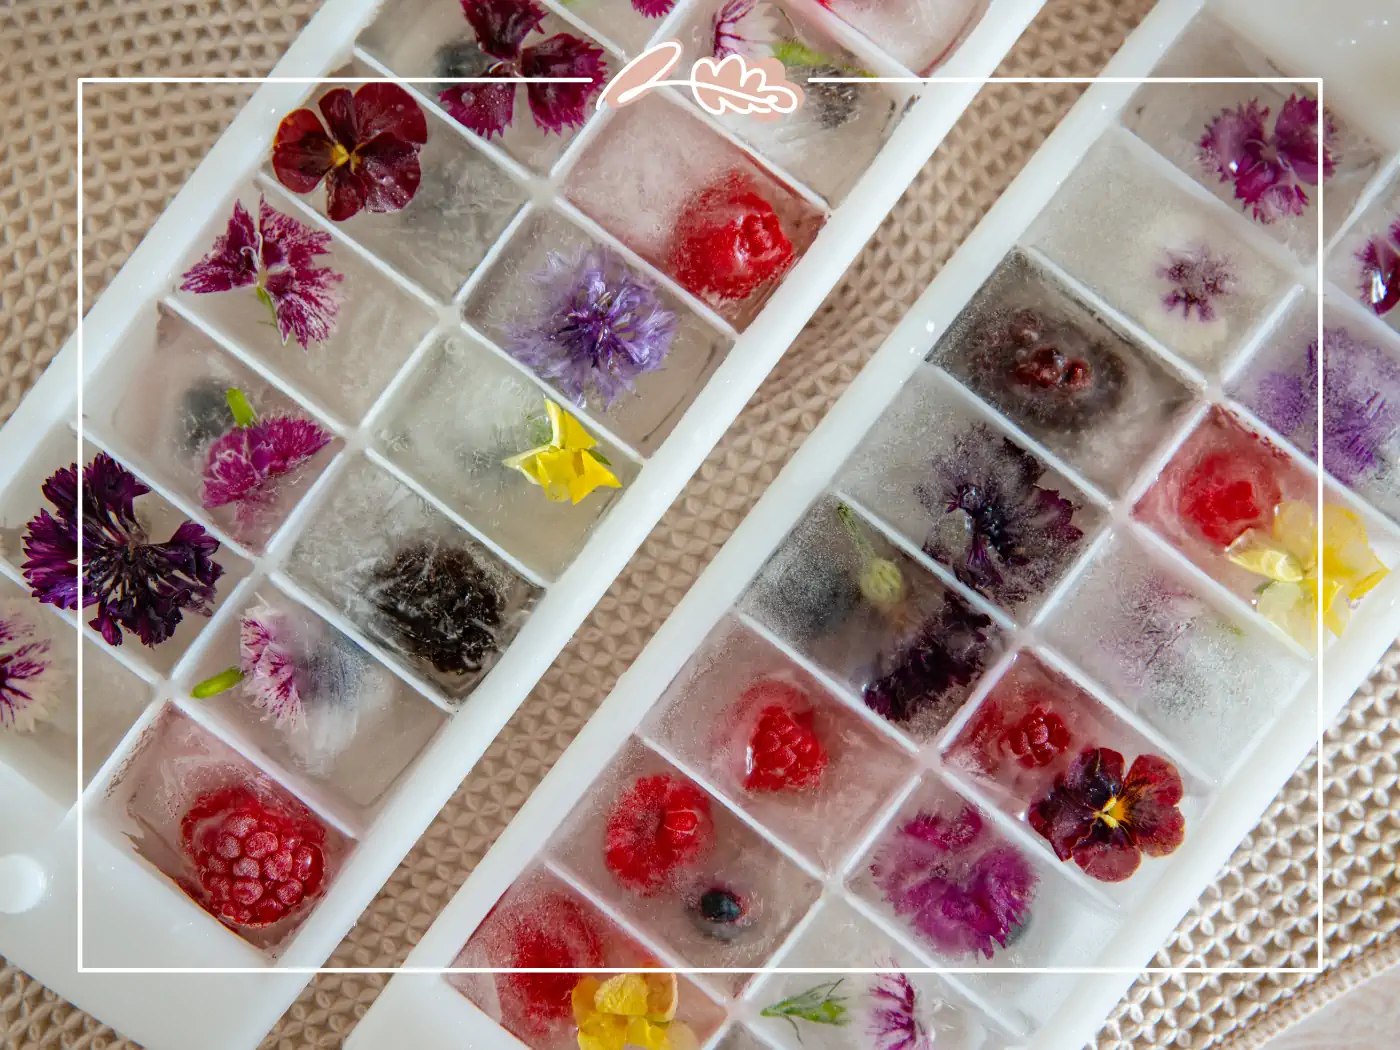 Ice cubes with embedded edible flowers and fruits. Fabulous Flowers and Gifts.